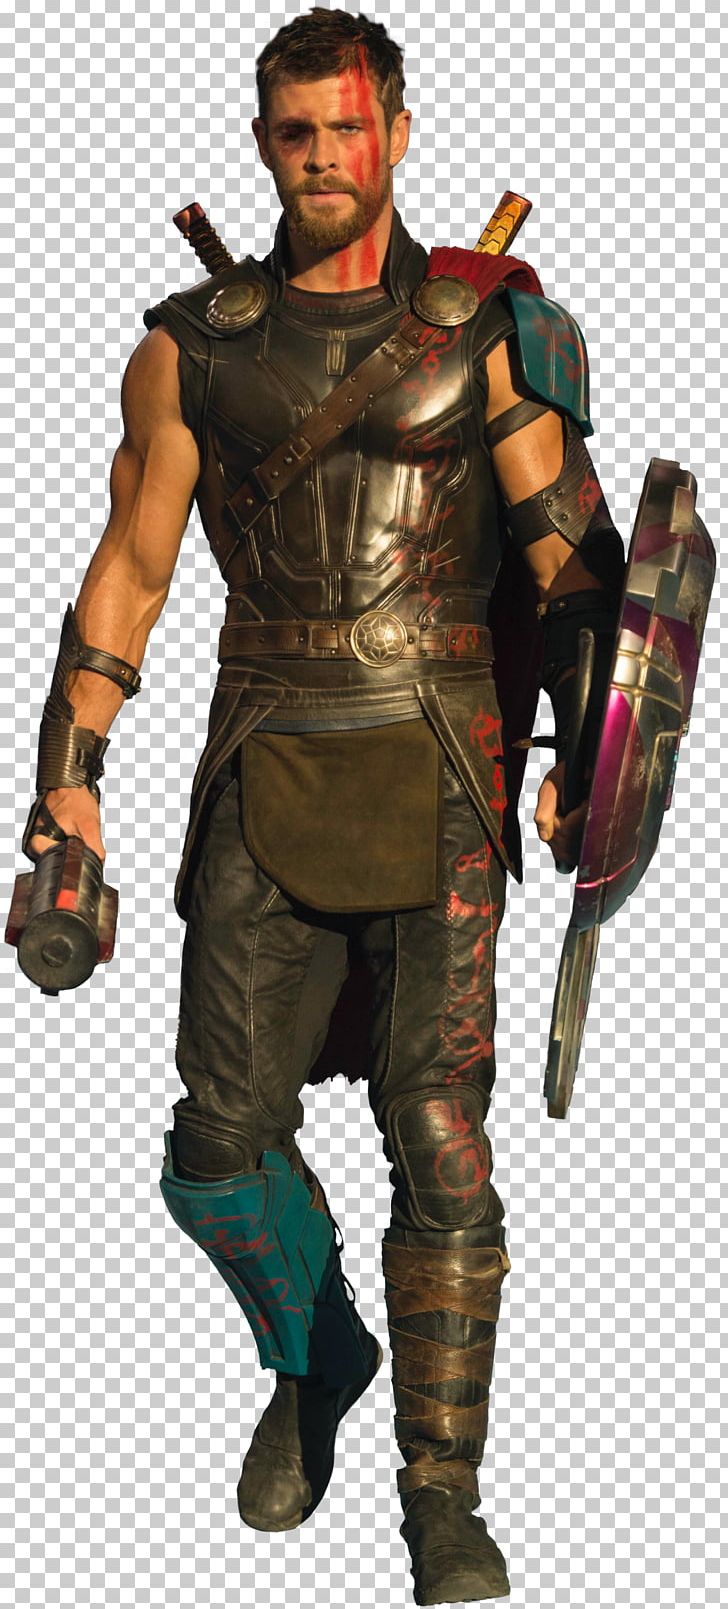 Chris Hemsworth Thor: Ragnarok Valkyrie Loki PNG, Clipart, Action Figure, Armour, Avengers Age Of Ultron, Black Panther, Chris Hemsworth Free PNG Download